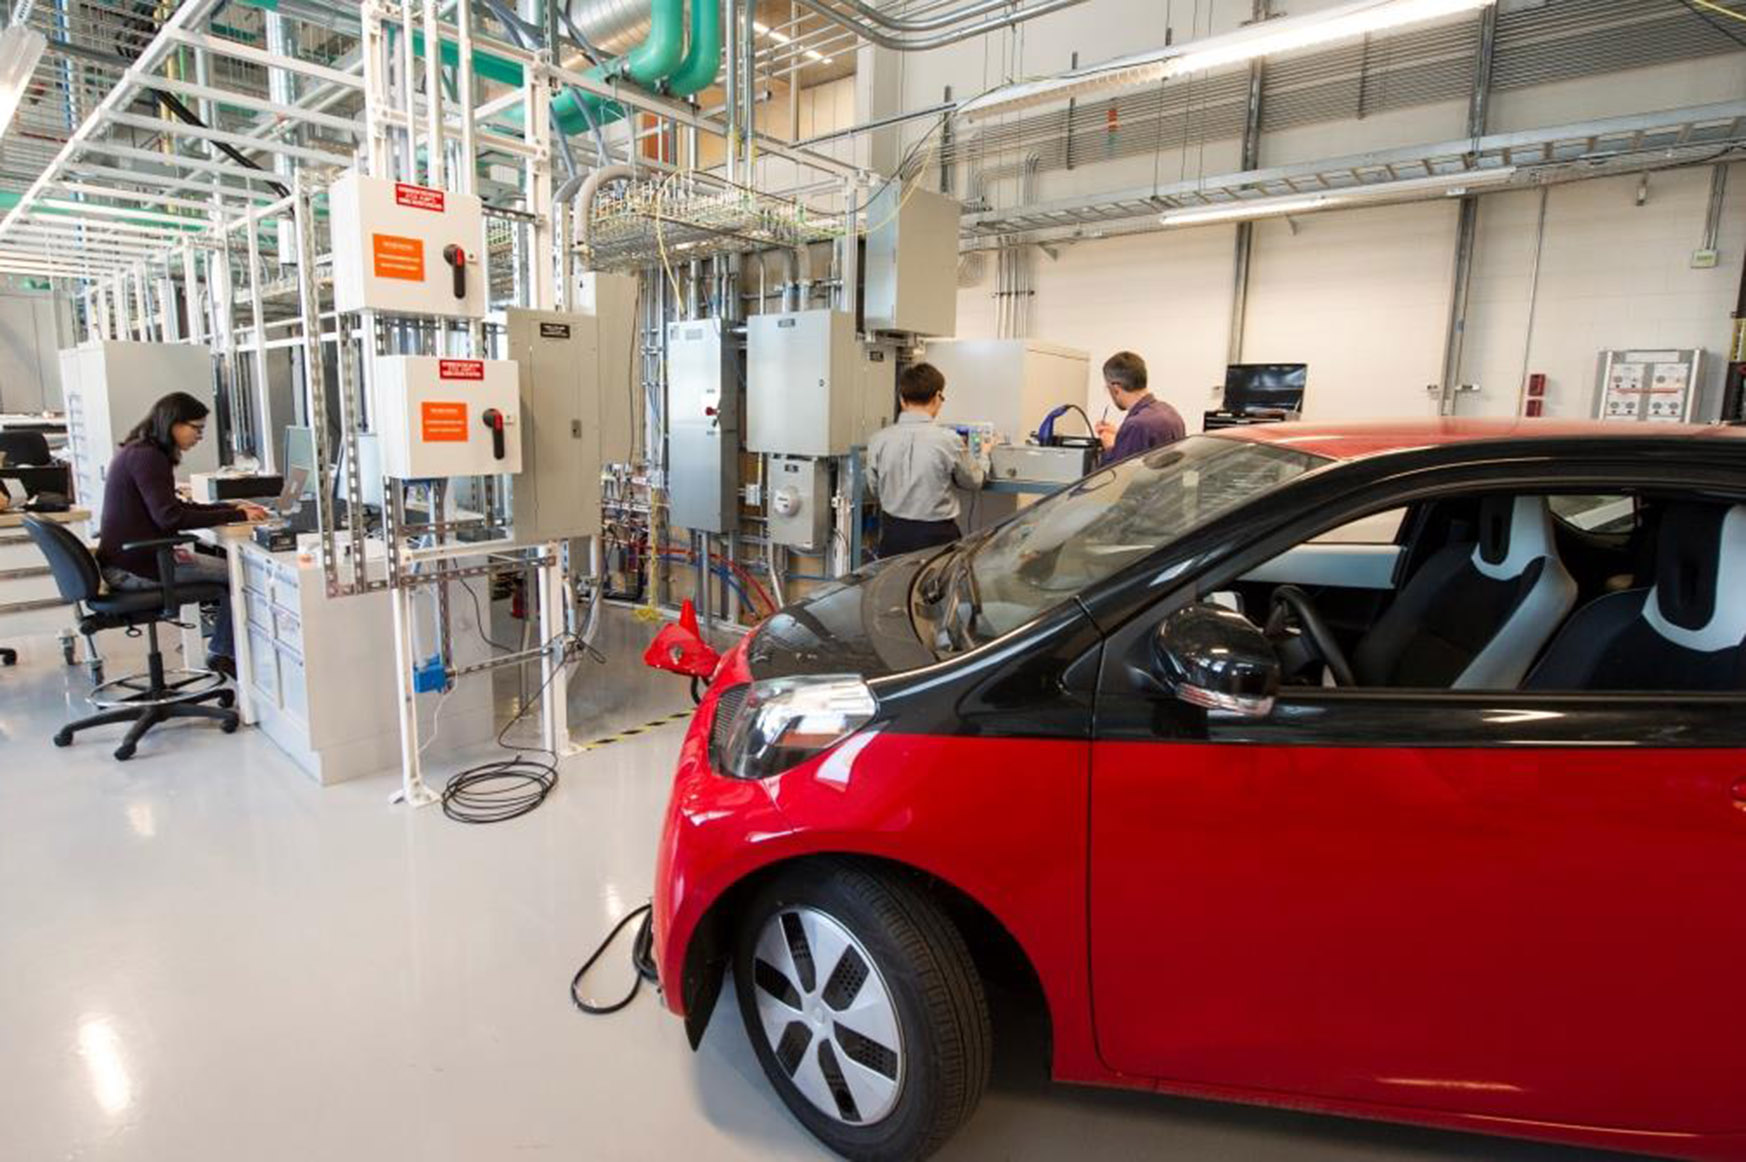 Photo of electric vehicle in laboratory setting.